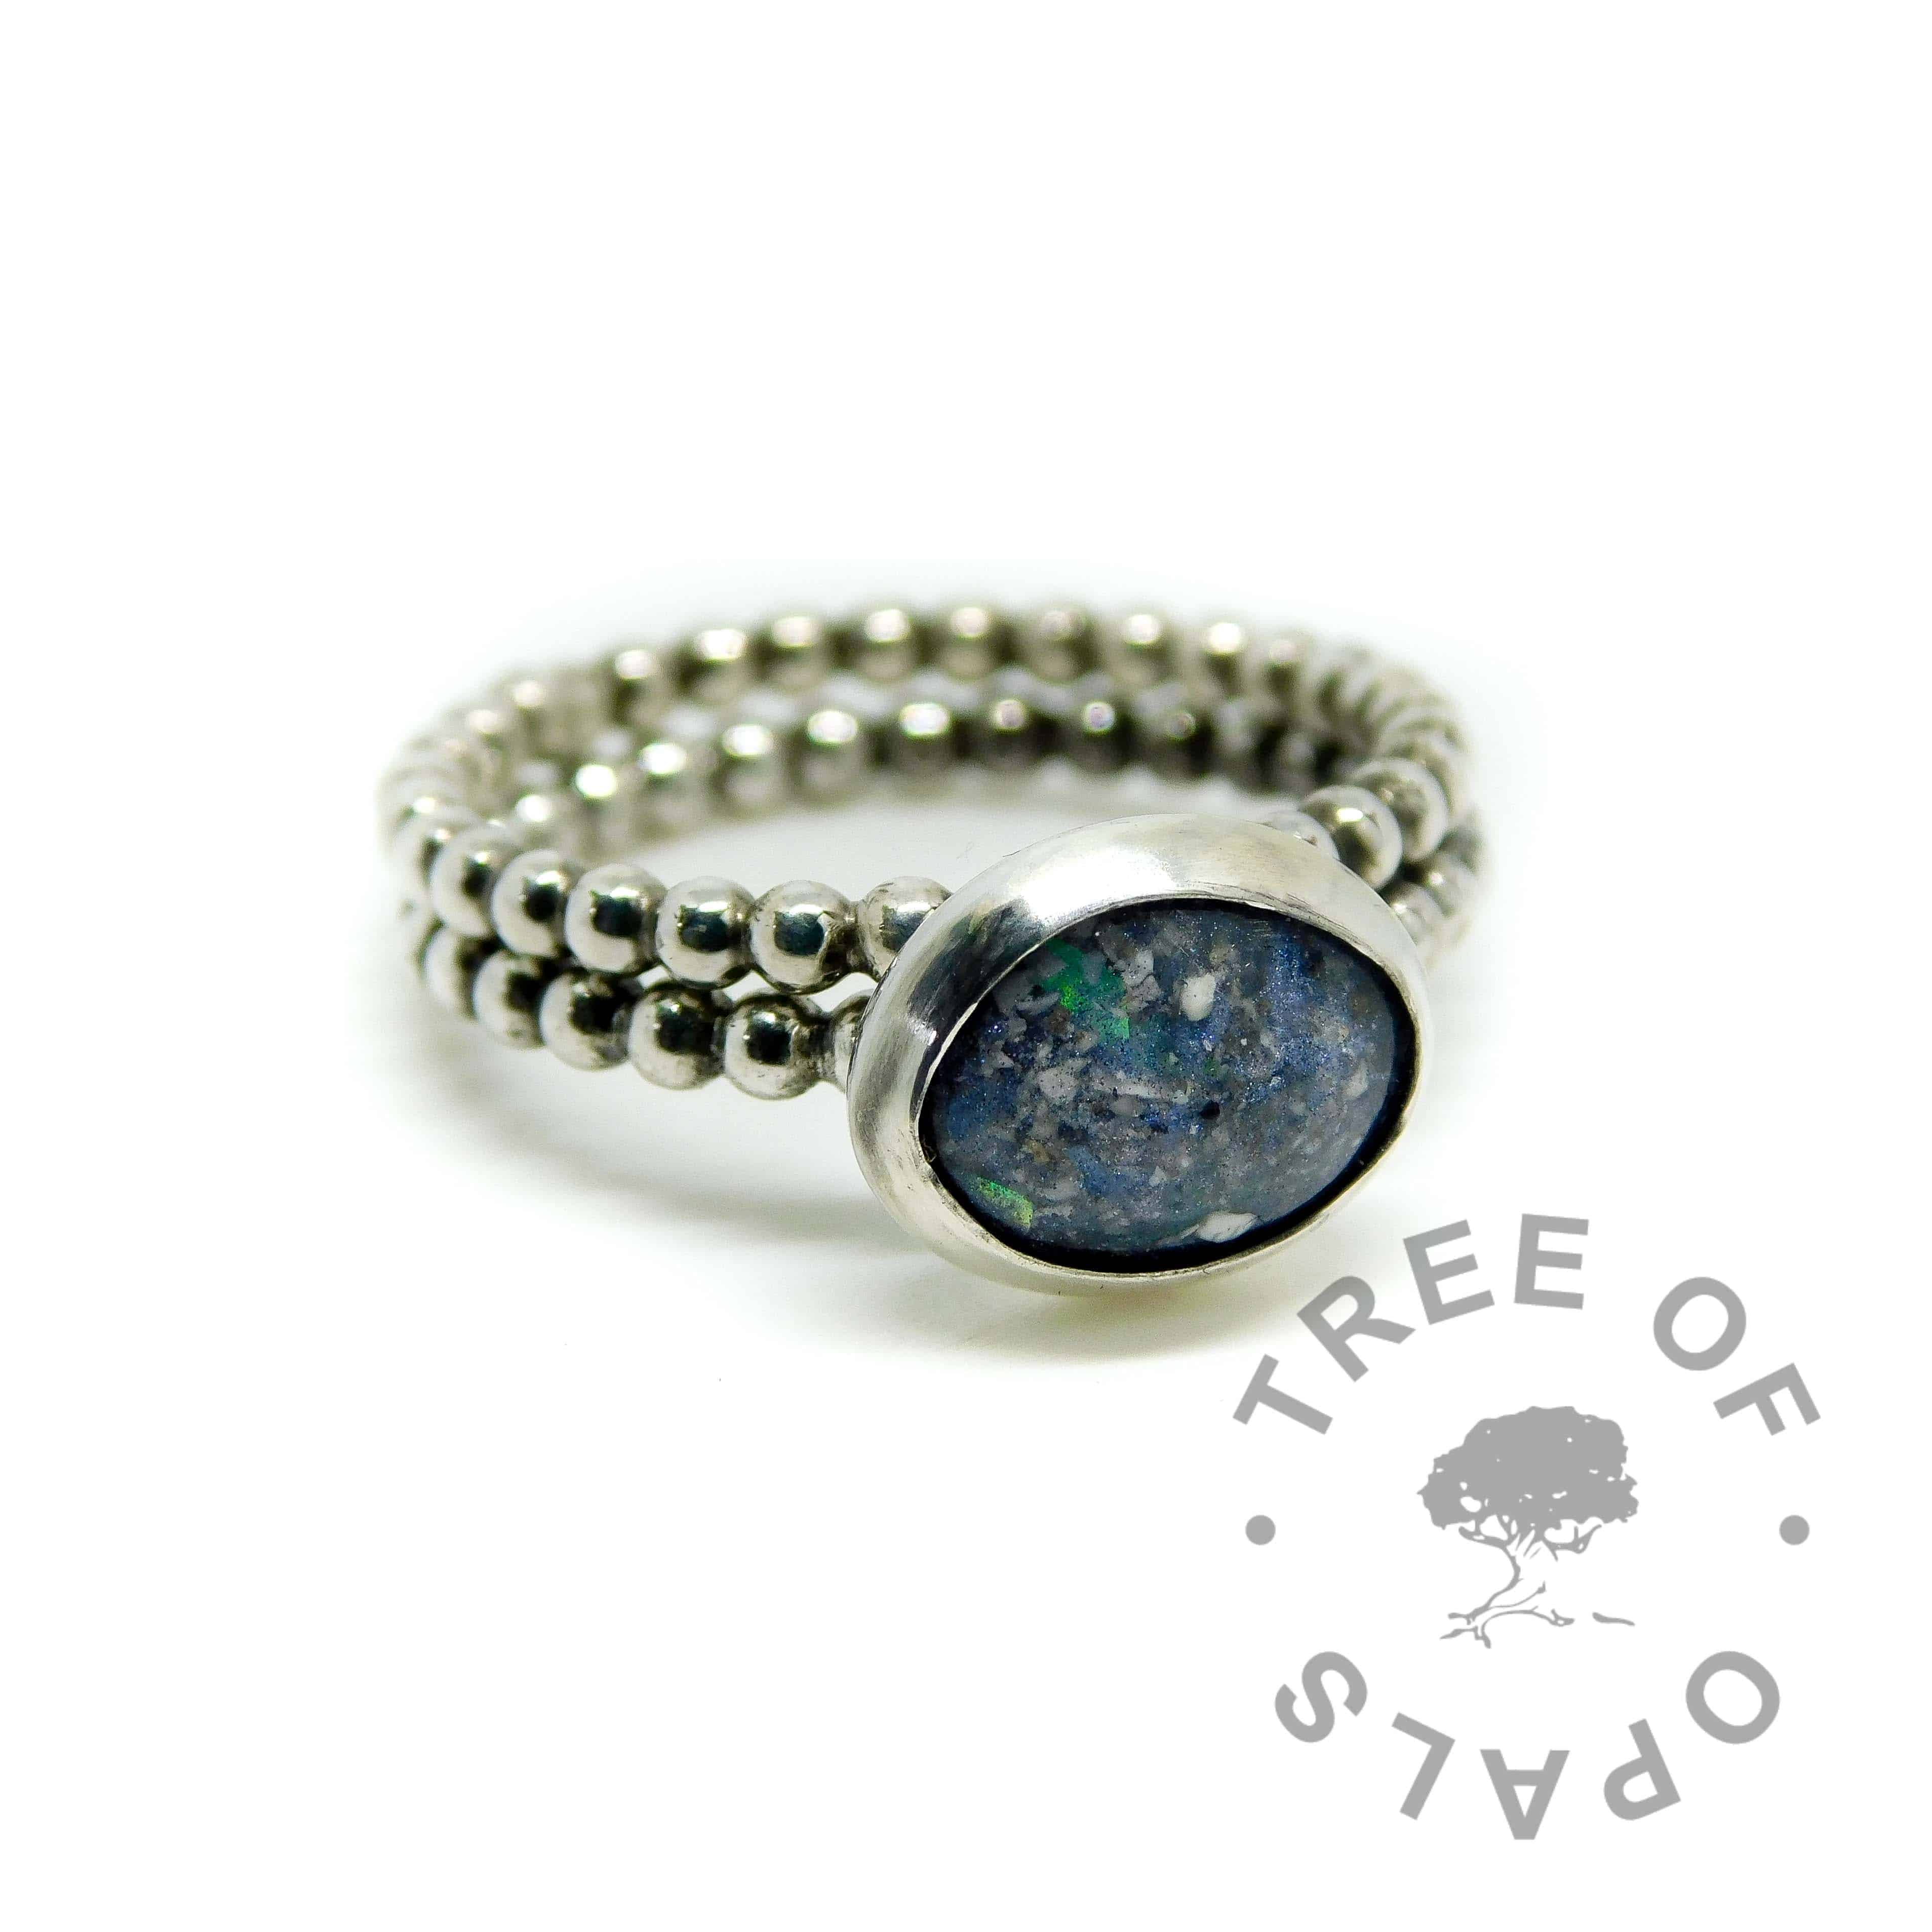 bubble wire band cremation ash ring with mermaid teal sparkle mix and bubble wire stacking band